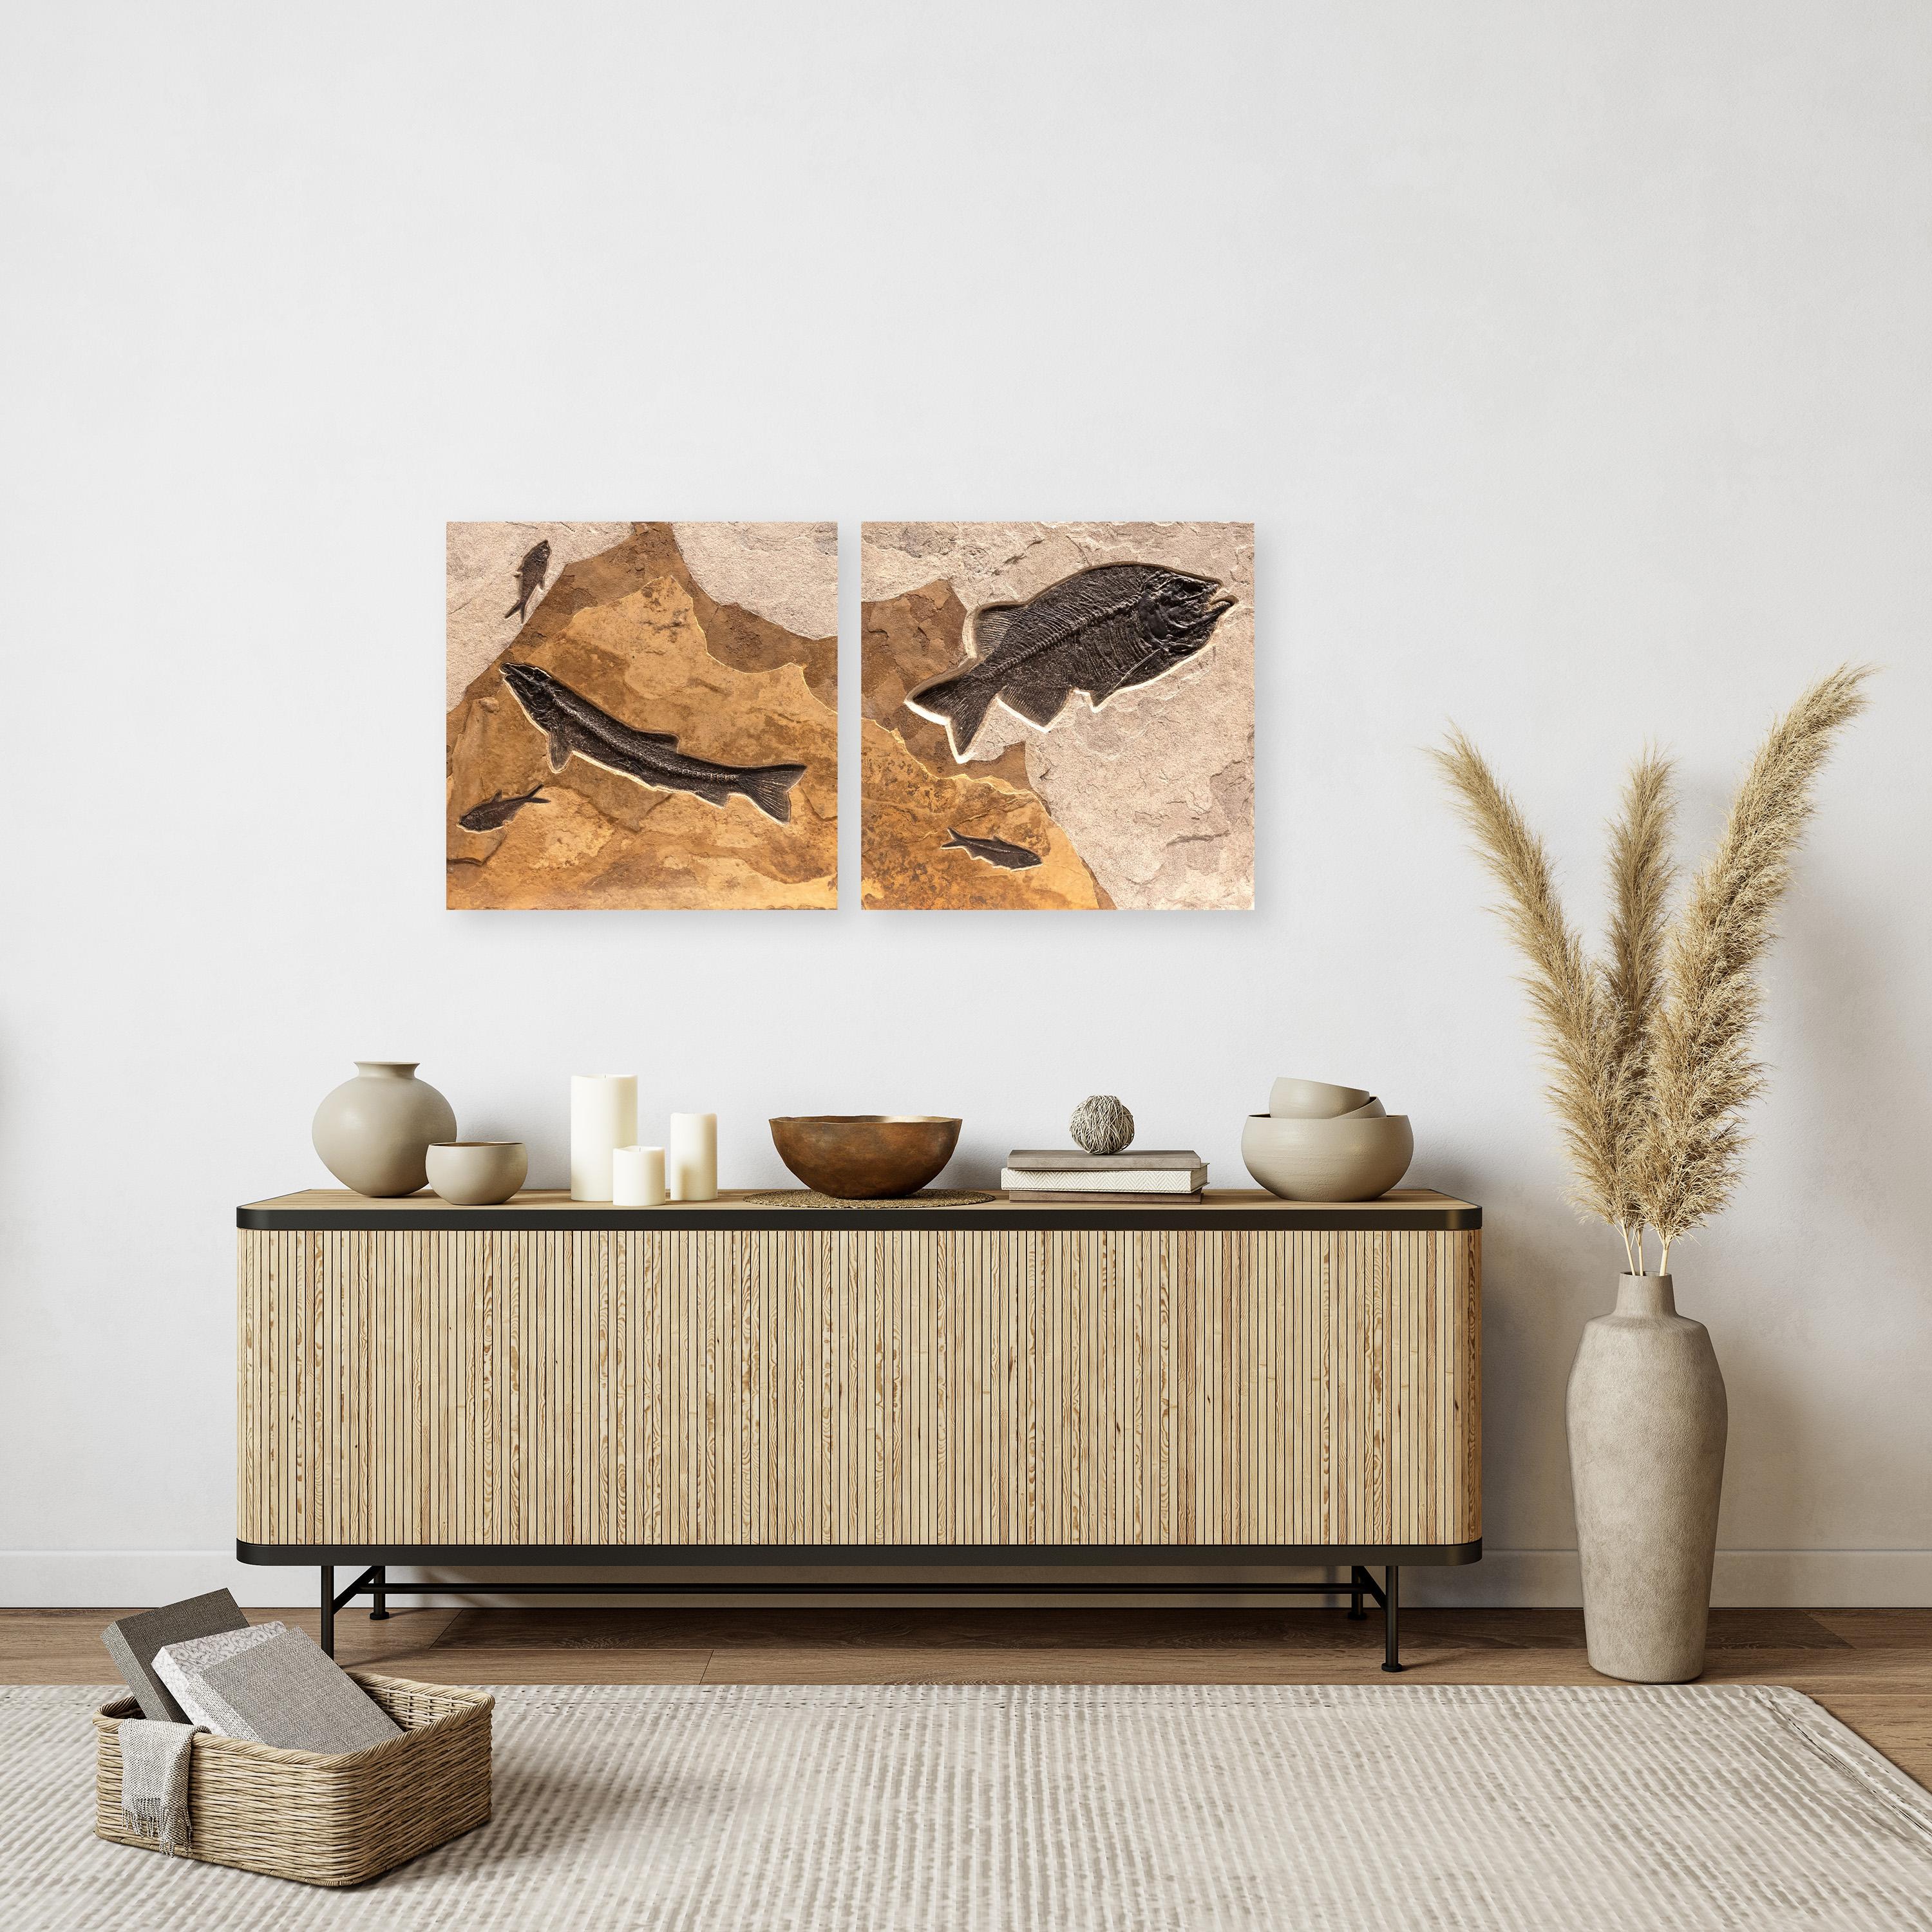 Immerse yourself in the timeless beauty of natural history with our exquisite collection of luxury fossil art. Showcasing breathtaking natural specimens from the legendary Green River Formation in Wyoming, each piece crafted by Green River Fossil